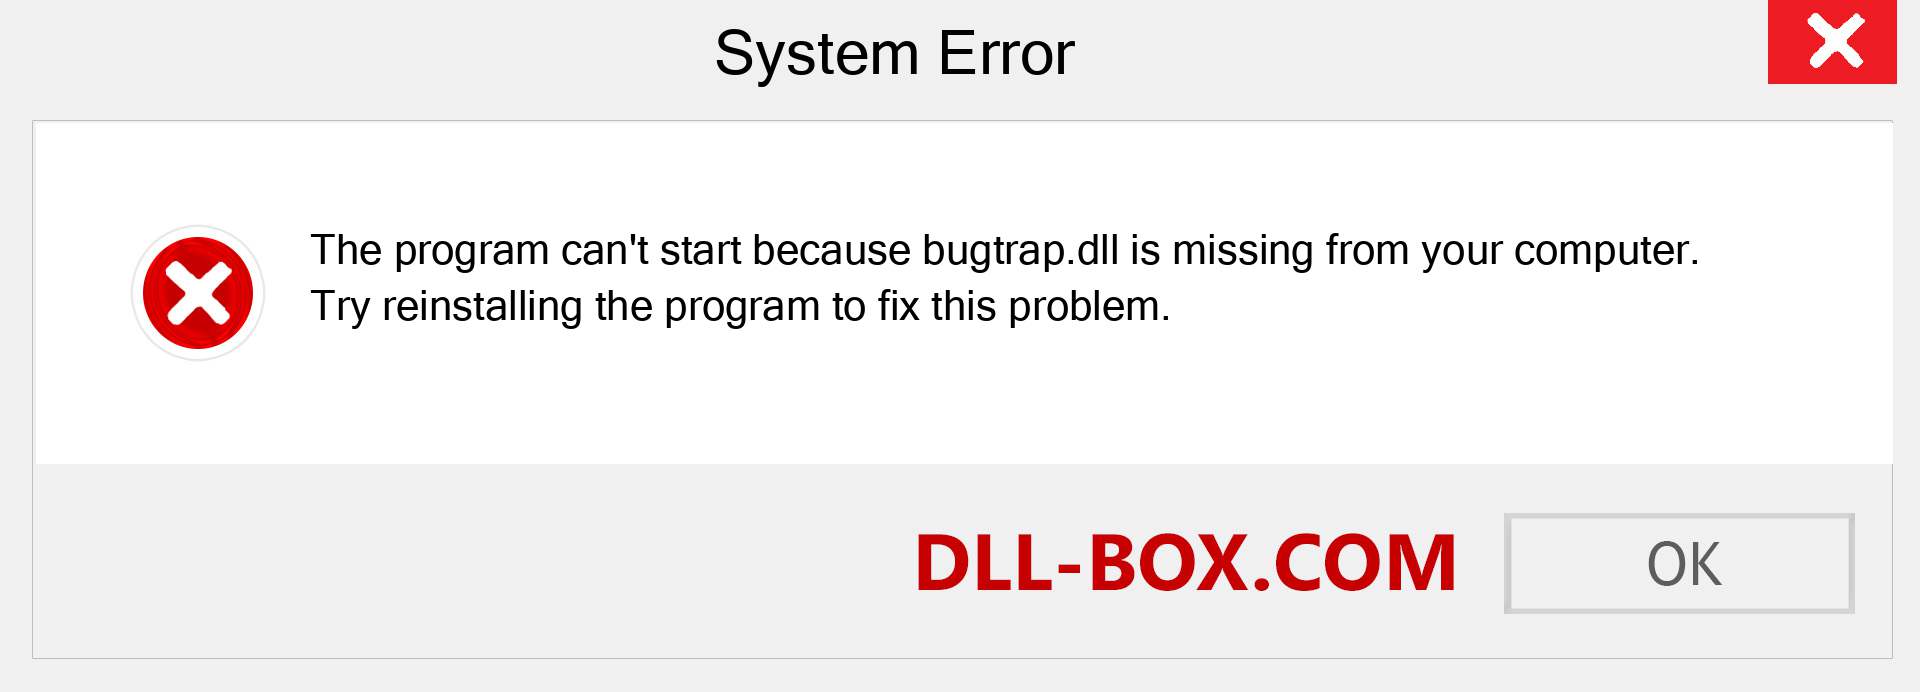  bugtrap.dll file is missing?. Download for Windows 7, 8, 10 - Fix  bugtrap dll Missing Error on Windows, photos, images